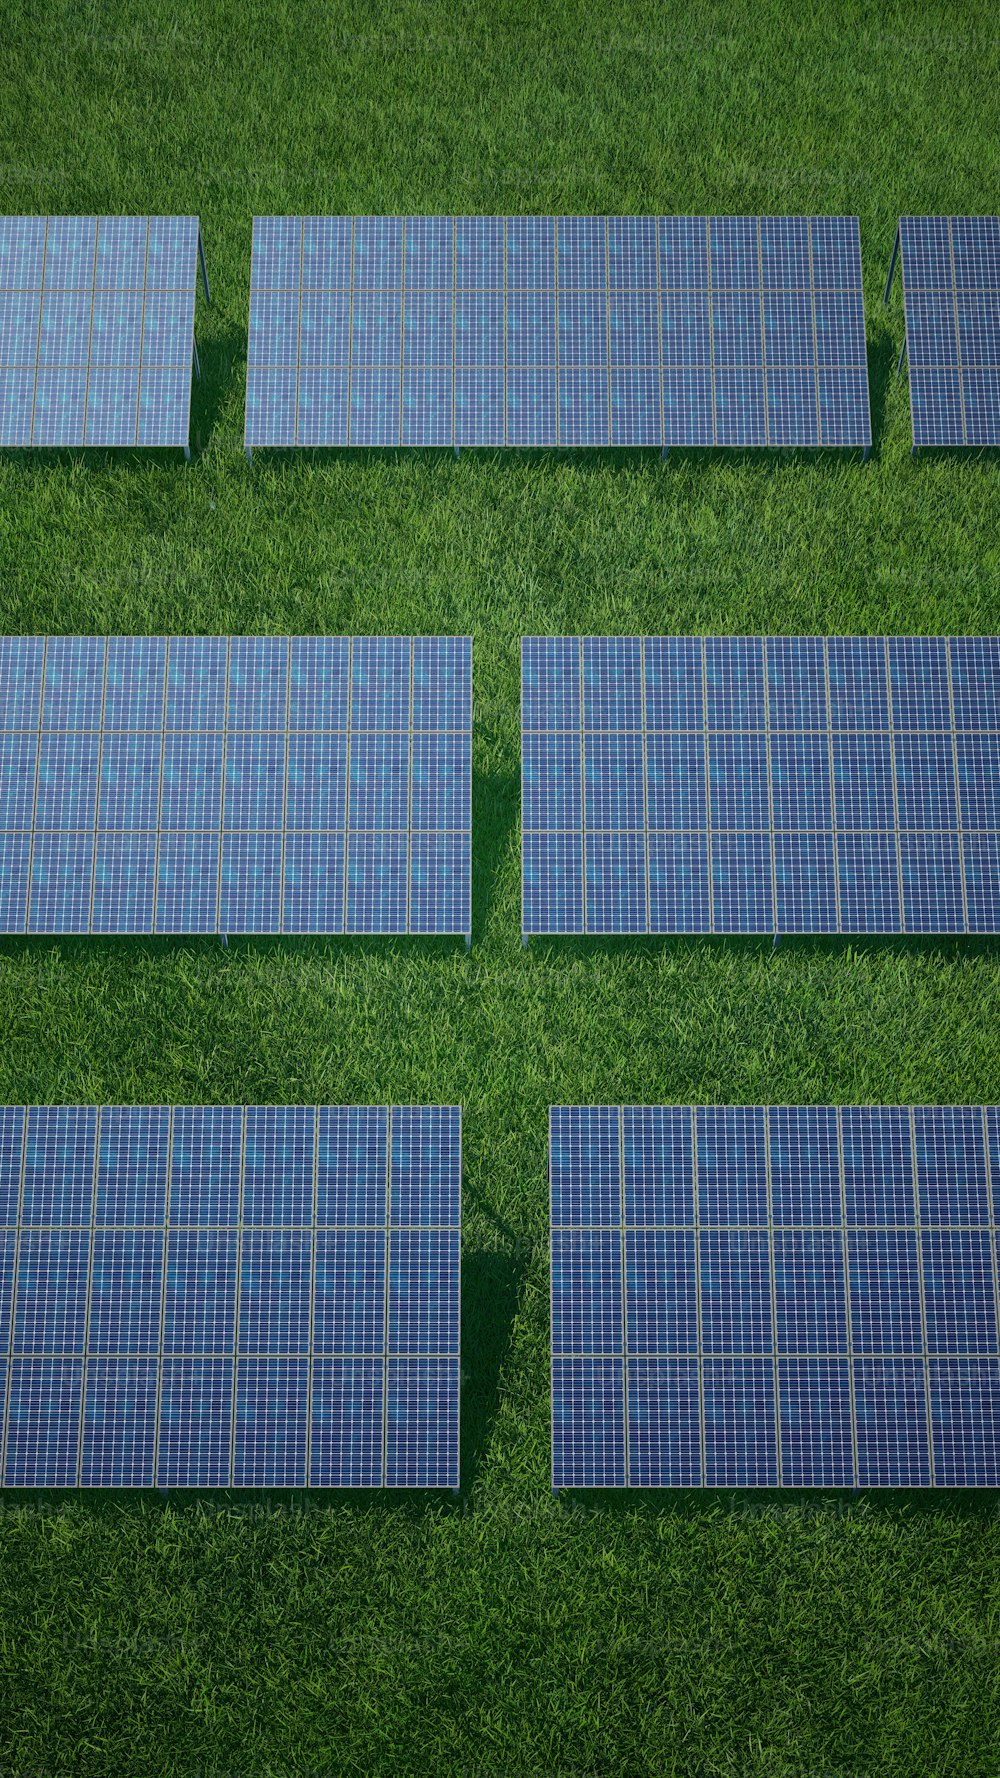 a group of solar panels laying on top of a lush green field